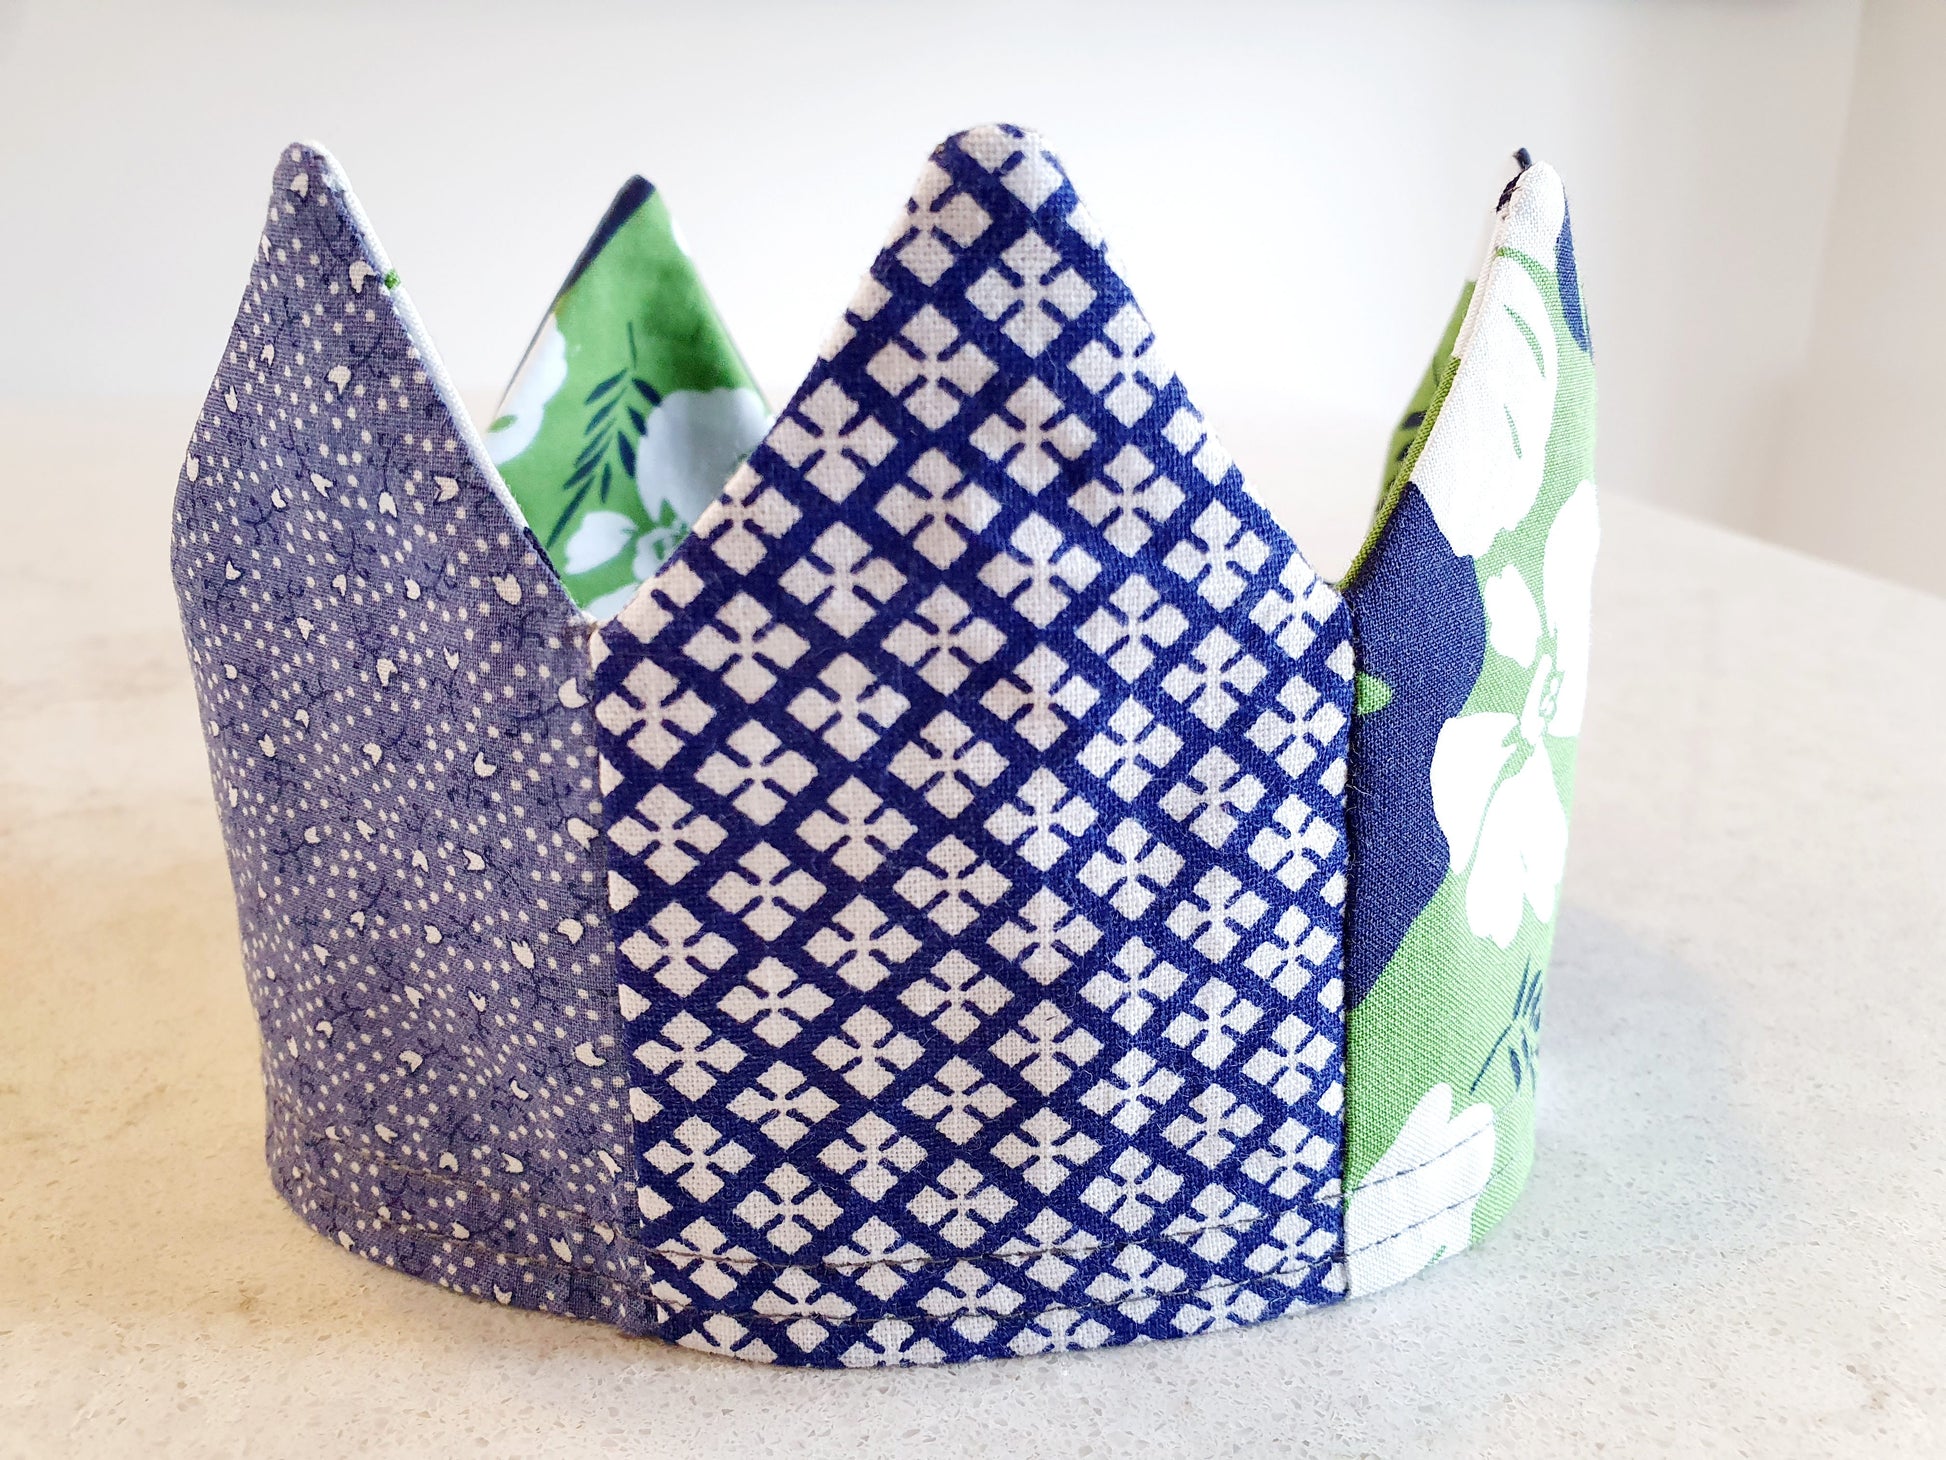 Reusable, Reversible Fabric Party Crown; perfect for your next birthday party. 